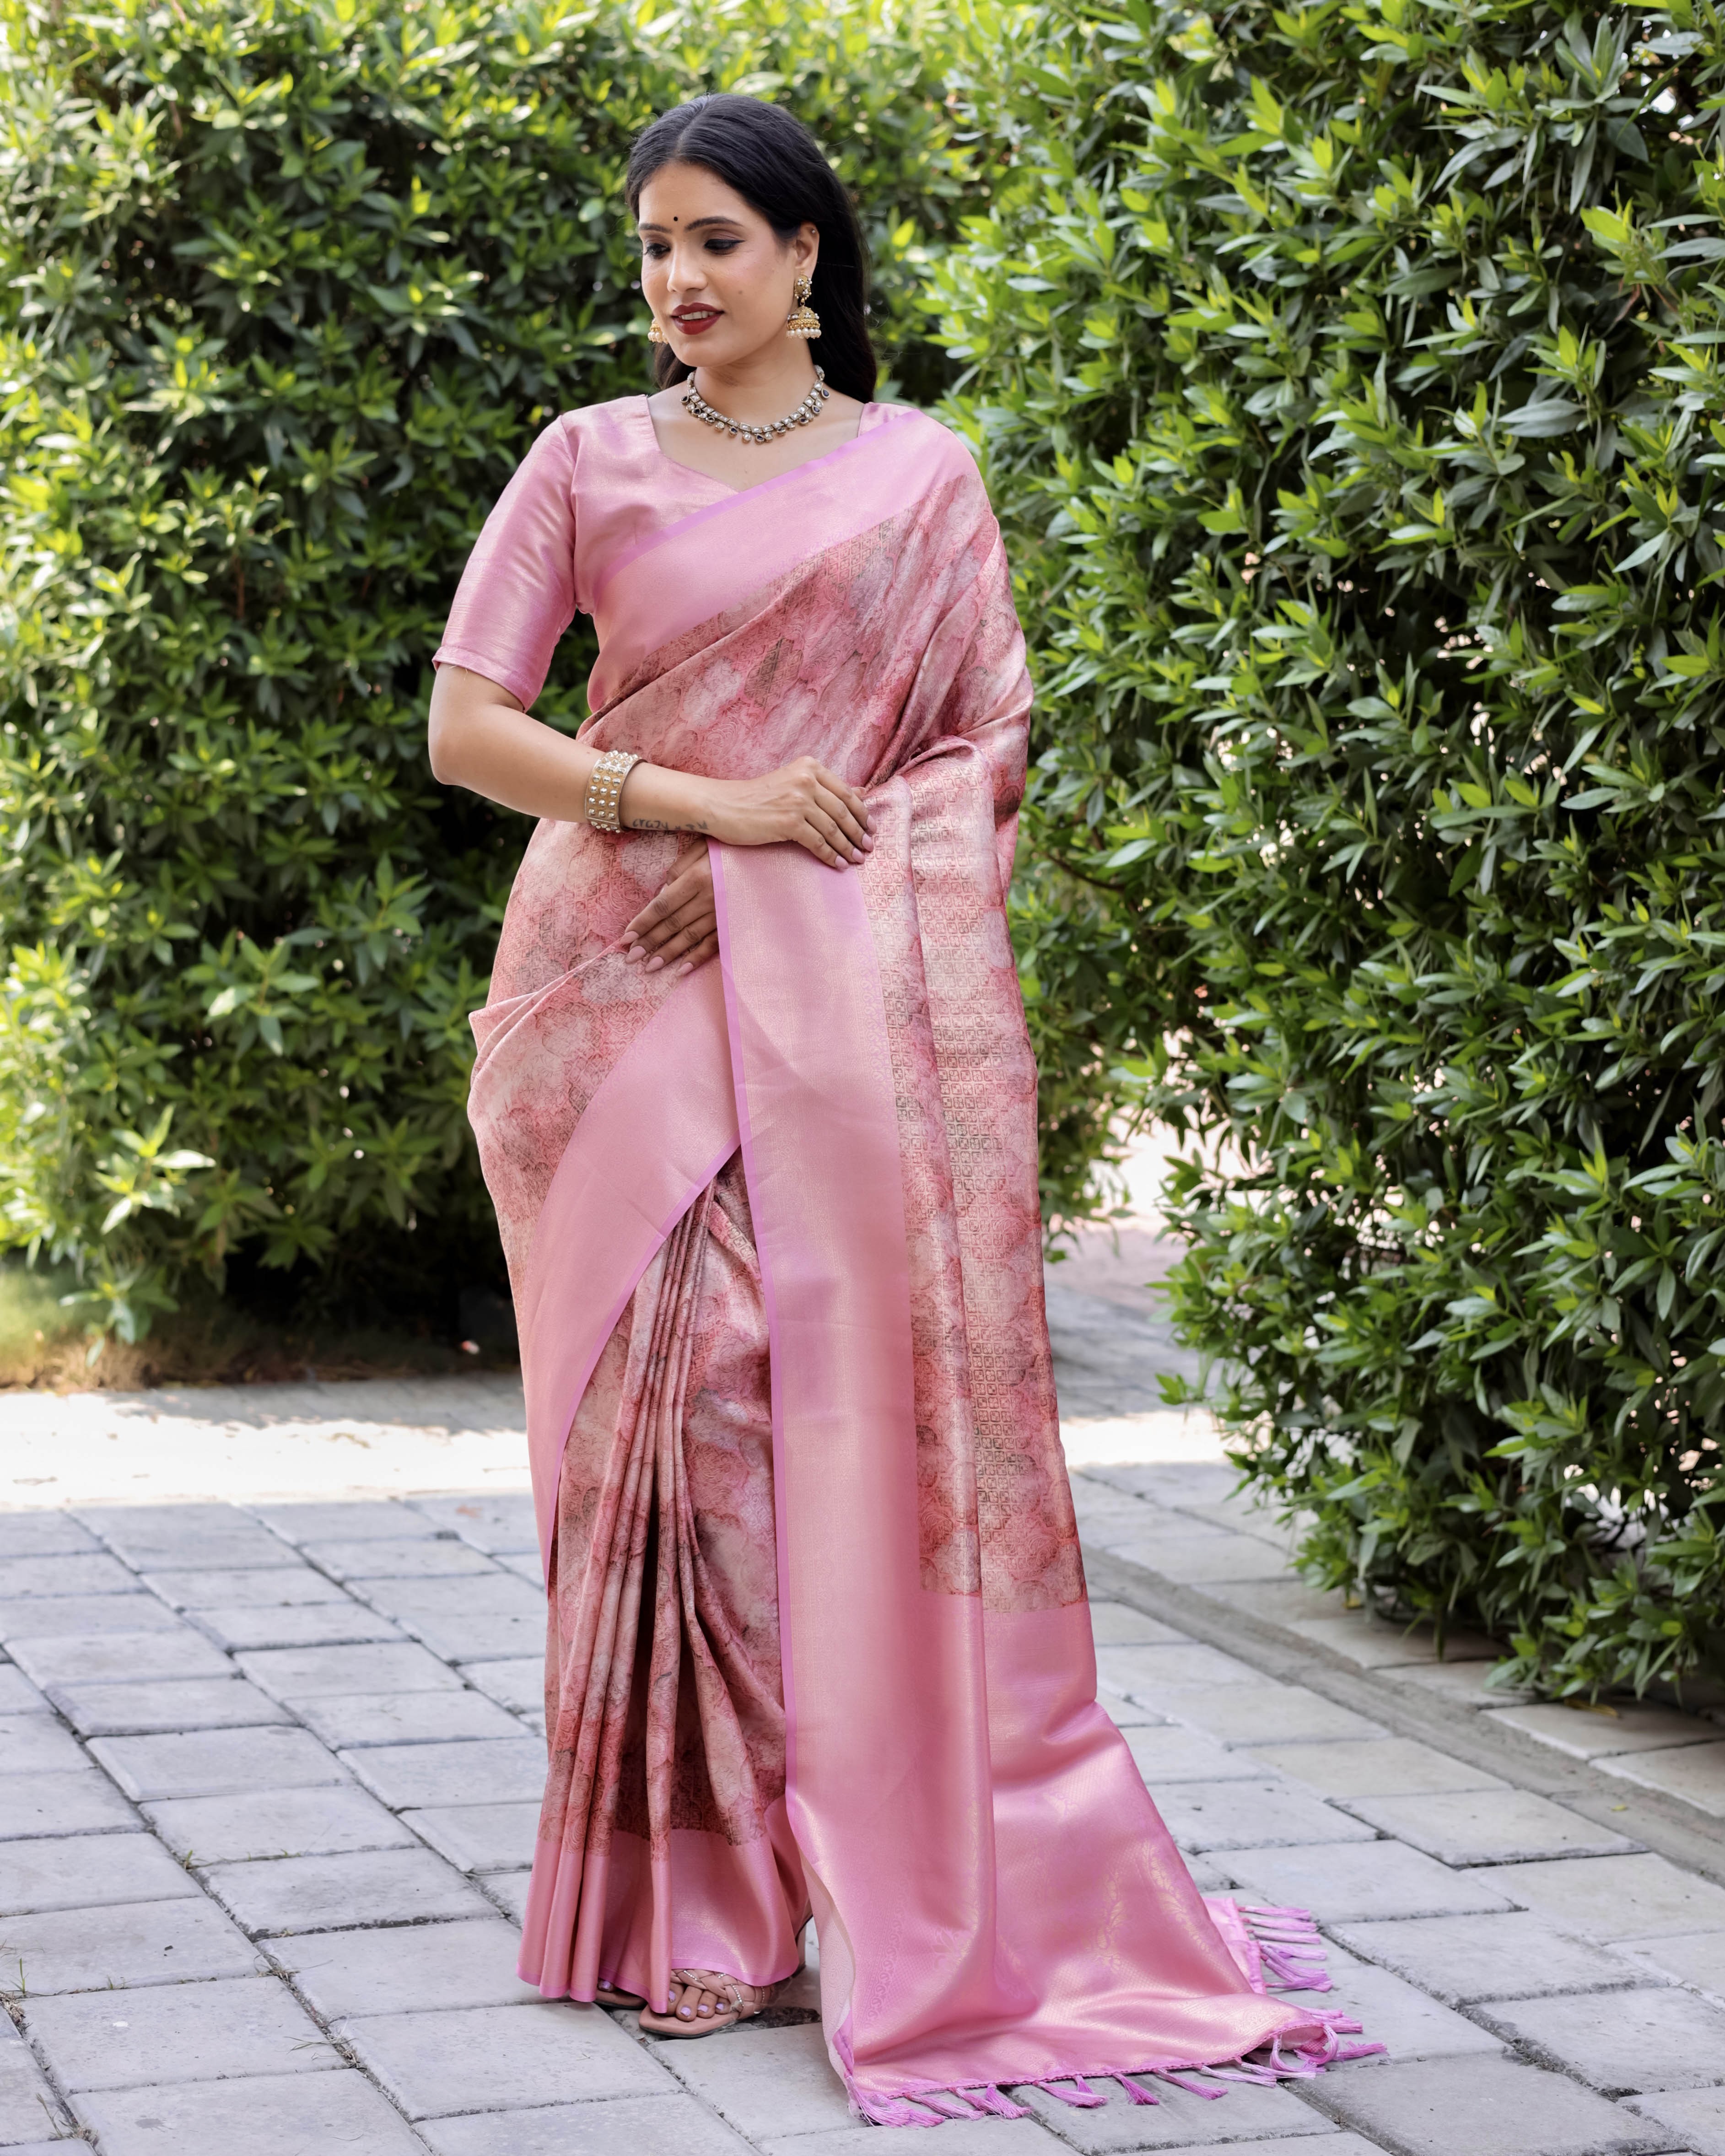 fcity.in - Daily Wear Saree Below 500 Rupees Saree For Women Bollywood  Latest